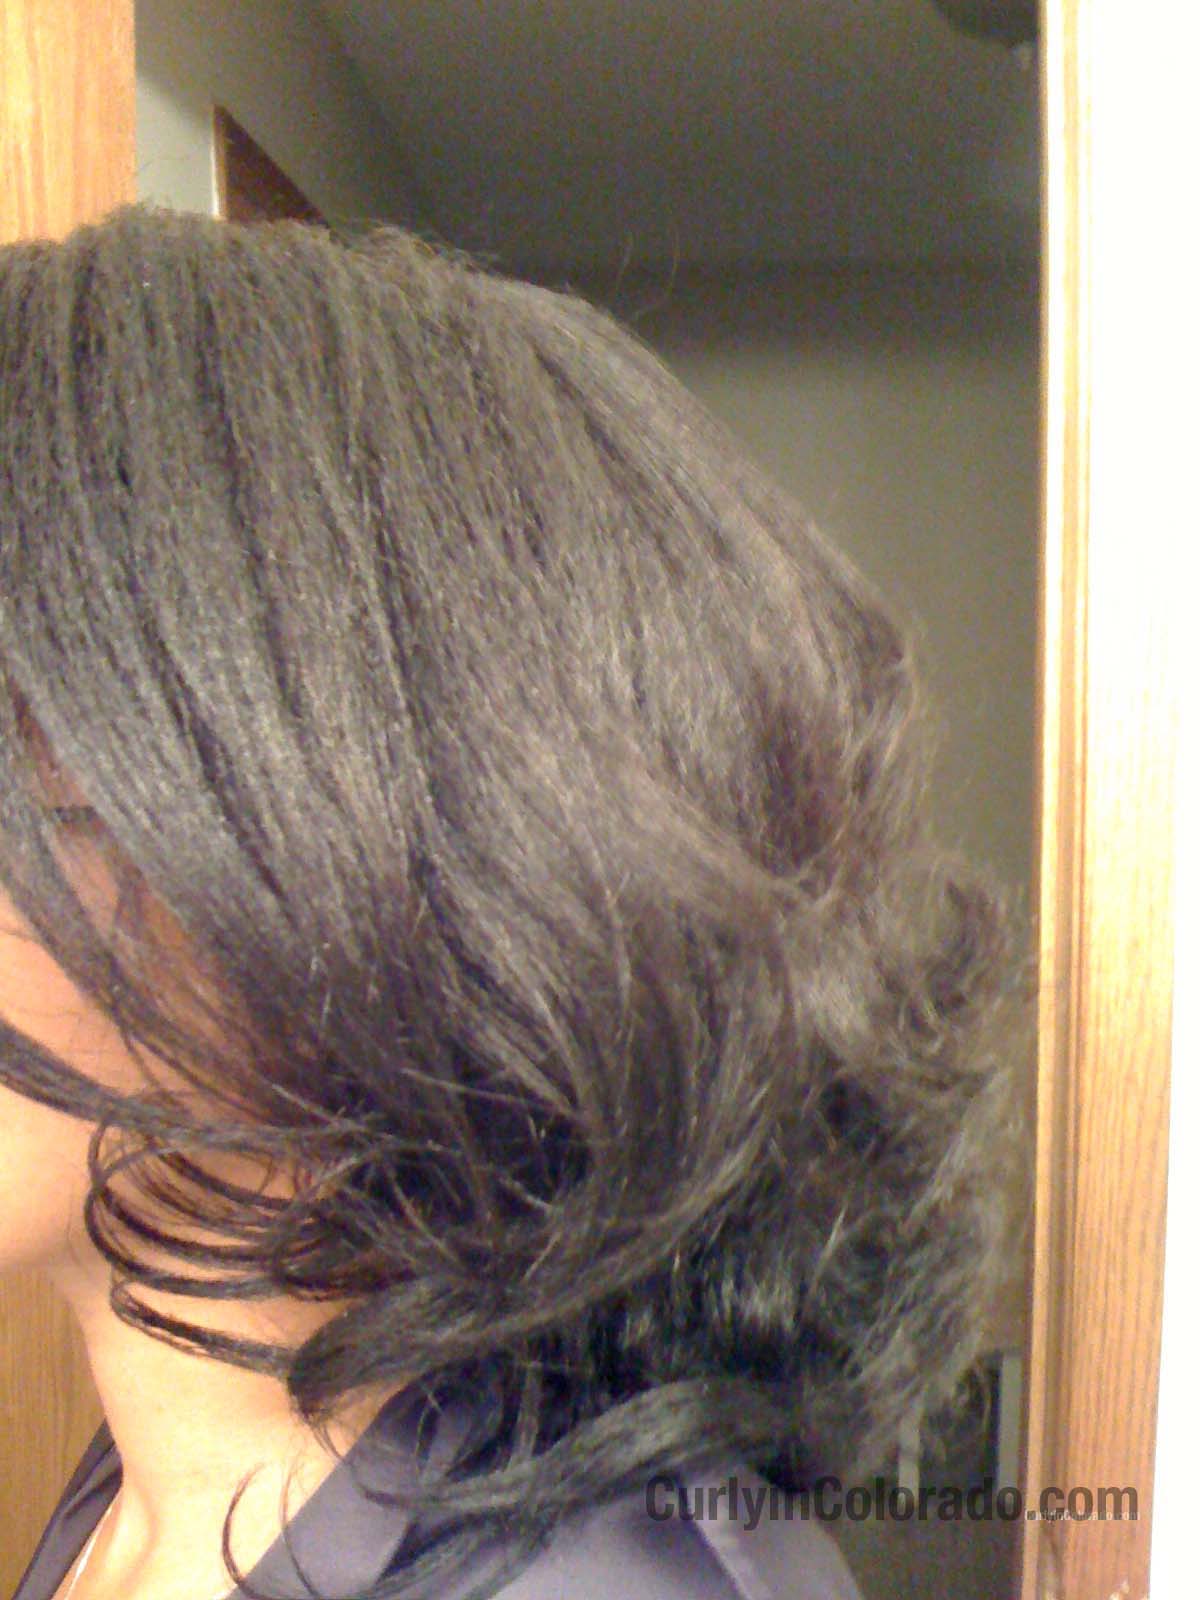 Roller Setting Natural Hair-What I Have Learned - Curly in Colorado